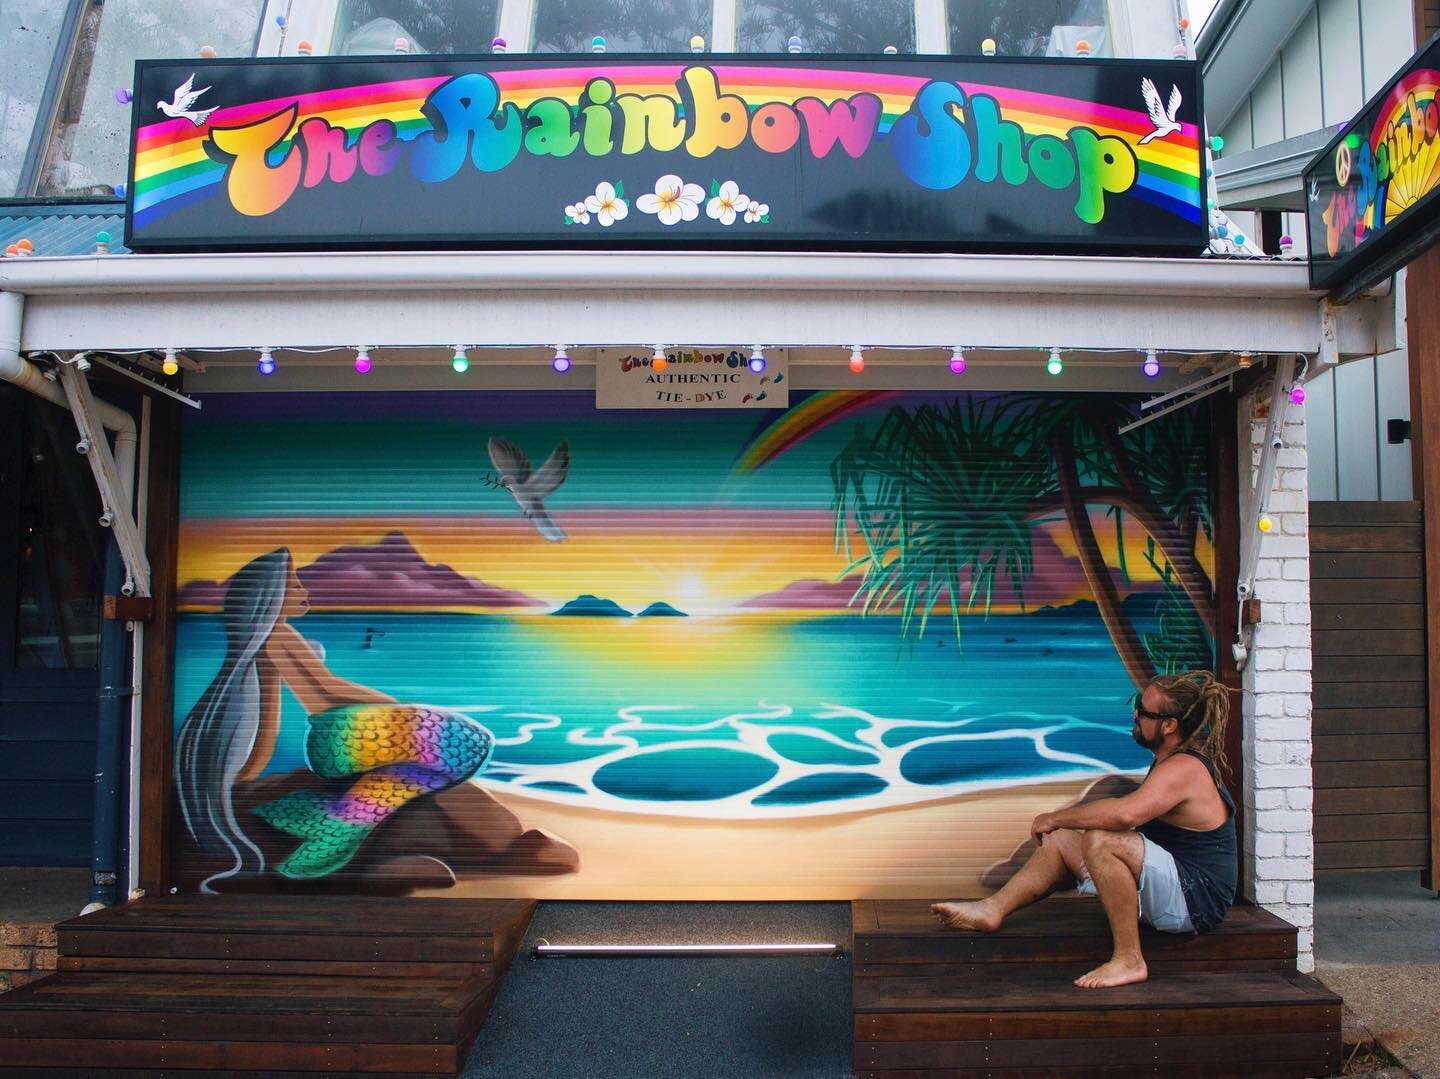 Roller door mural painted for the rainbow shop in Byron Bay. 💙✌️🌈✨

The mural features a rainbow mermaid gazing out at juilian rocks. A popular dive spot just of the coast. 🌊 

It also includes a white dove which resembles peace and harmony. A rem